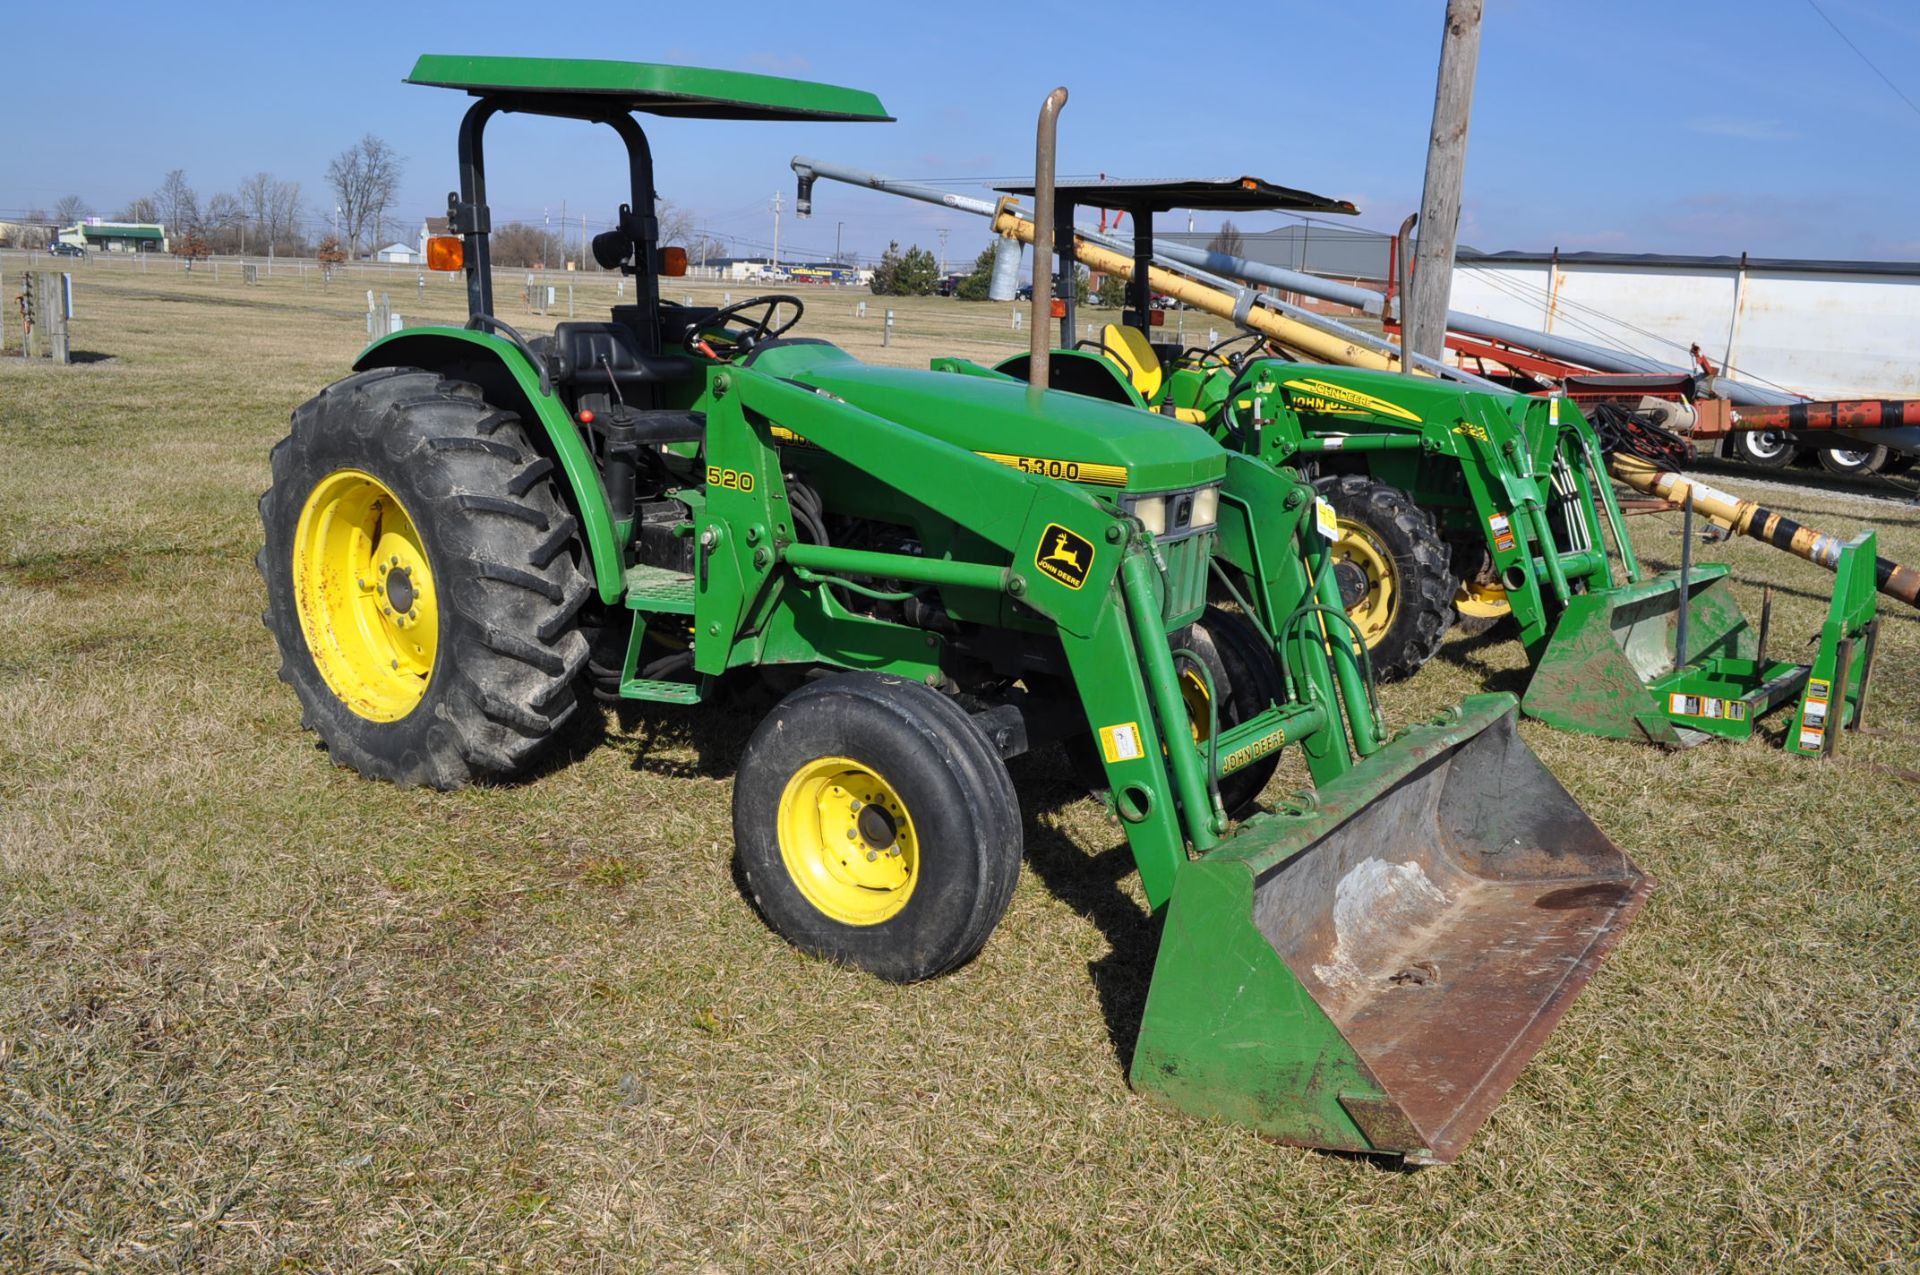 John Deere 5300 tractor, 16.9-3- rear, 9.50L-15 front, diesel, 2 hyd remotes, 540 PTO, 3 pt, - Image 2 of 14